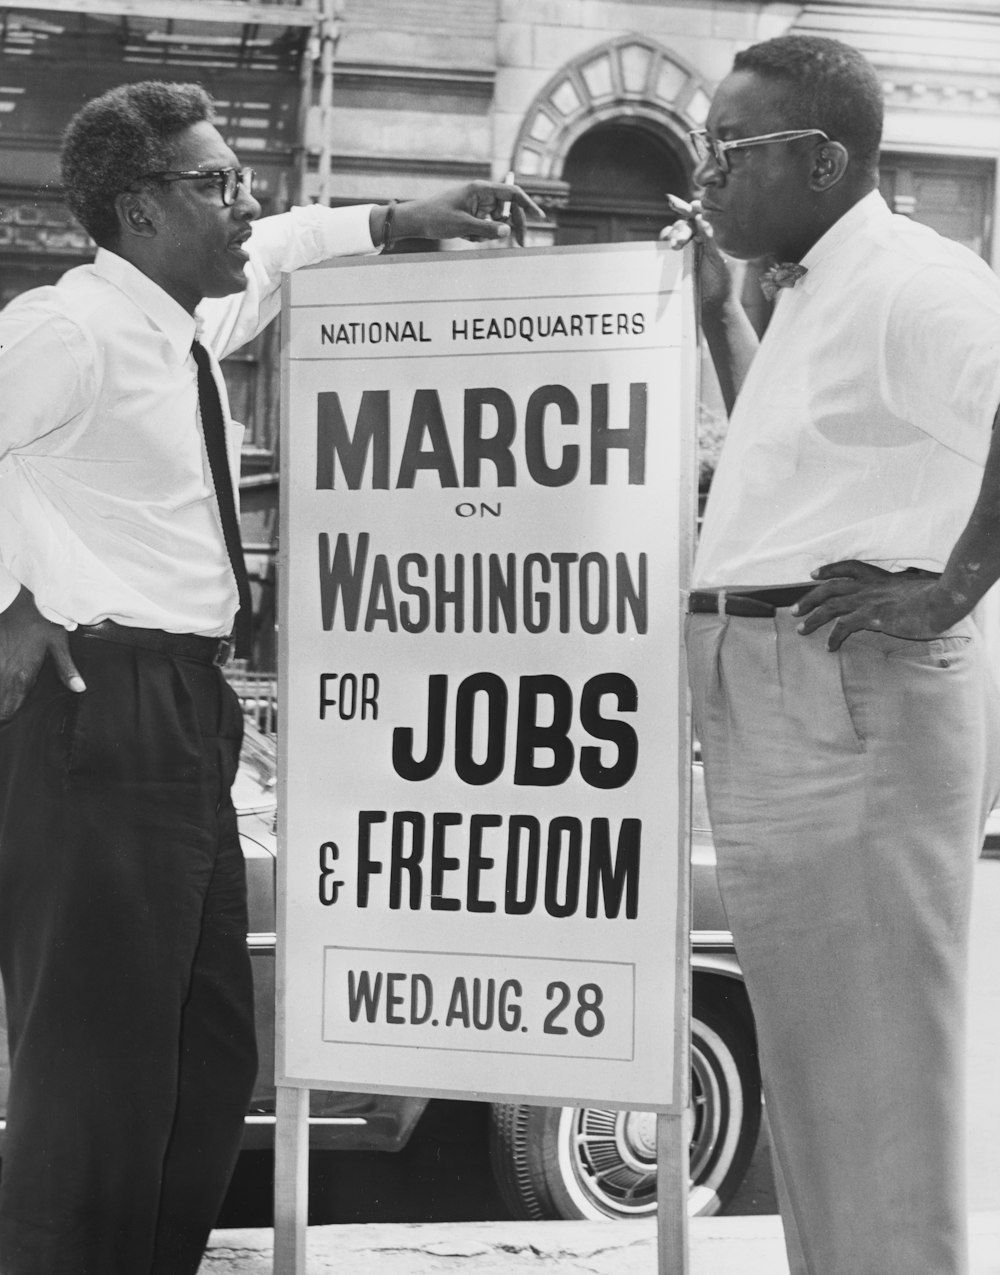 In front of 170 W 130 St., March on Washington, l t[o] r Bayard Rustin, Deputy Director, Cleveland Robinson, Chairman of Administrative Committee.